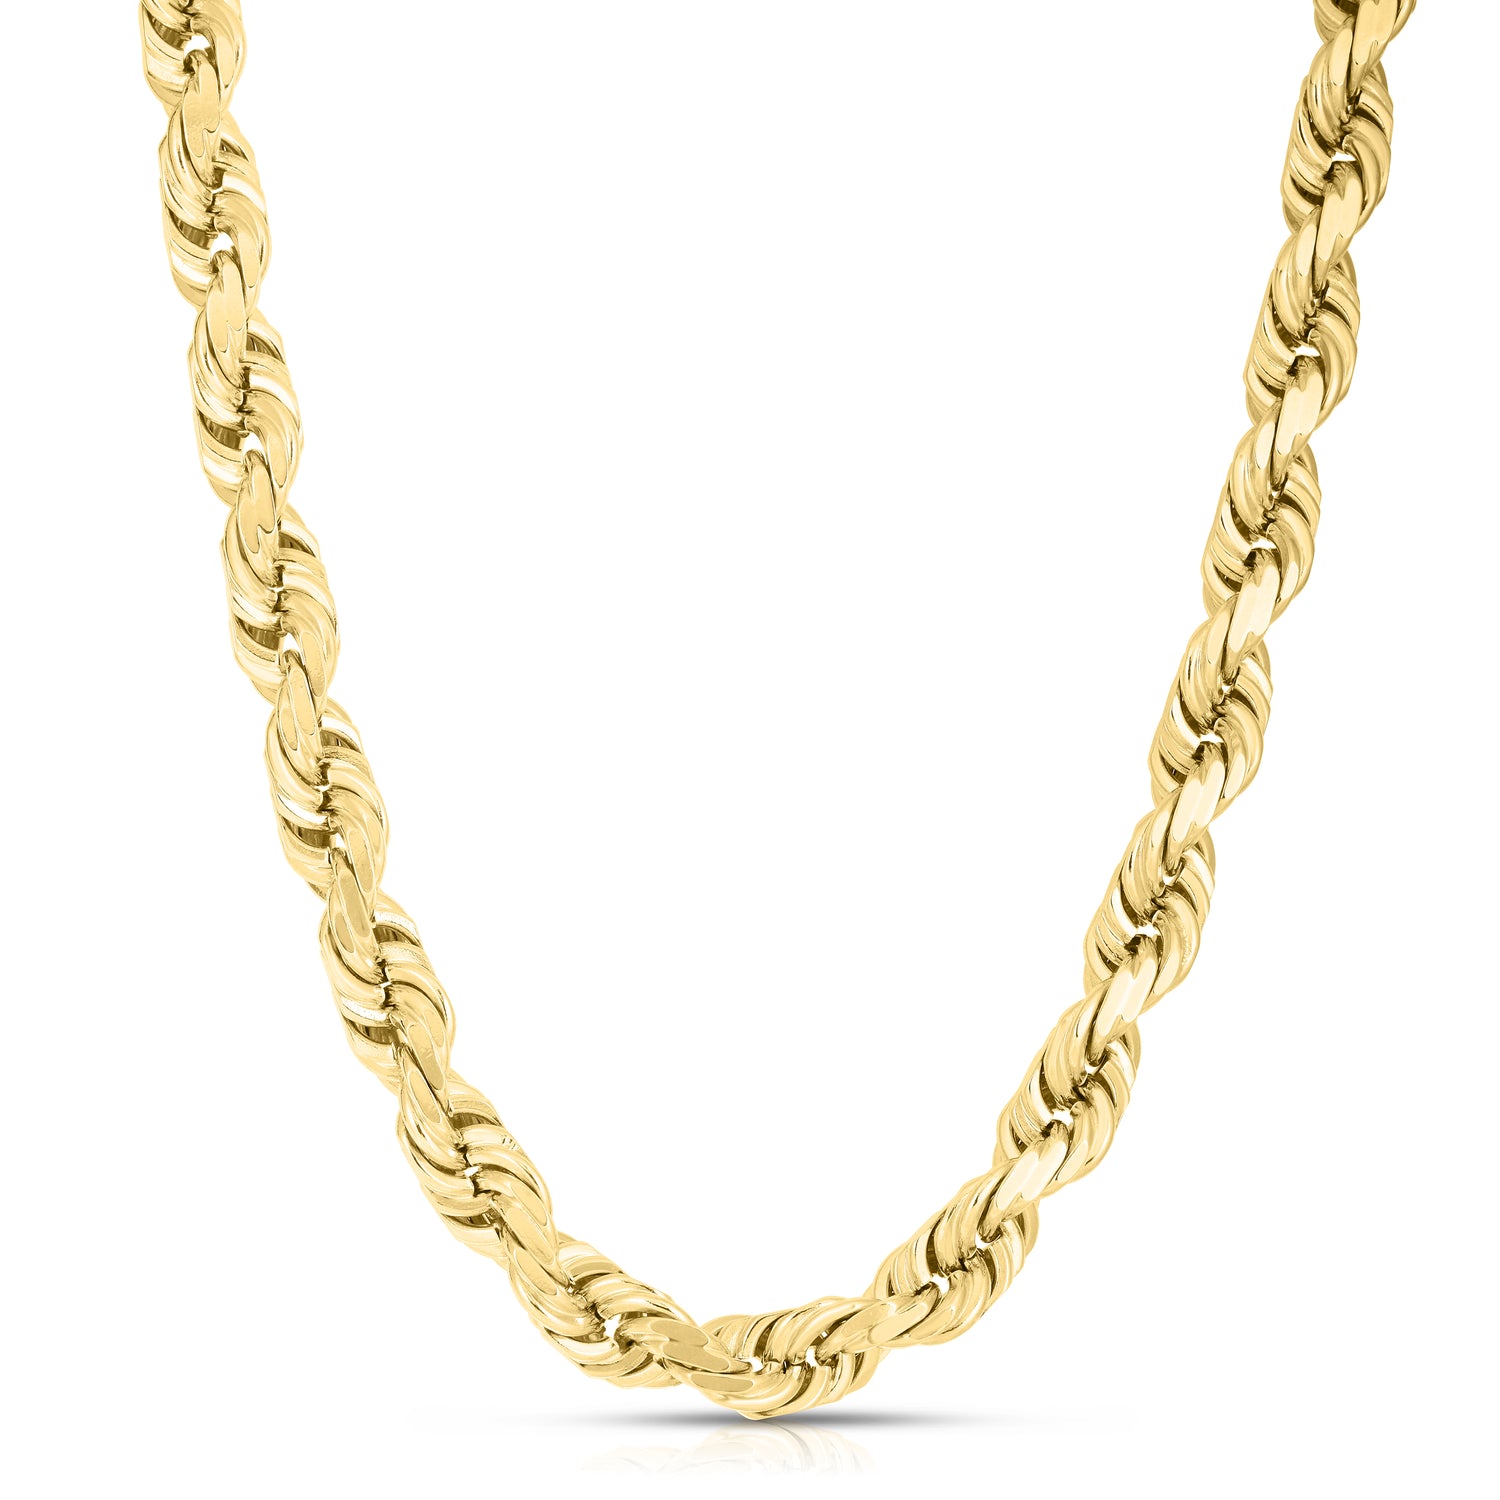 10k Yellow Gold 10mm Solid Diamond Cut Rope Chain Necklace